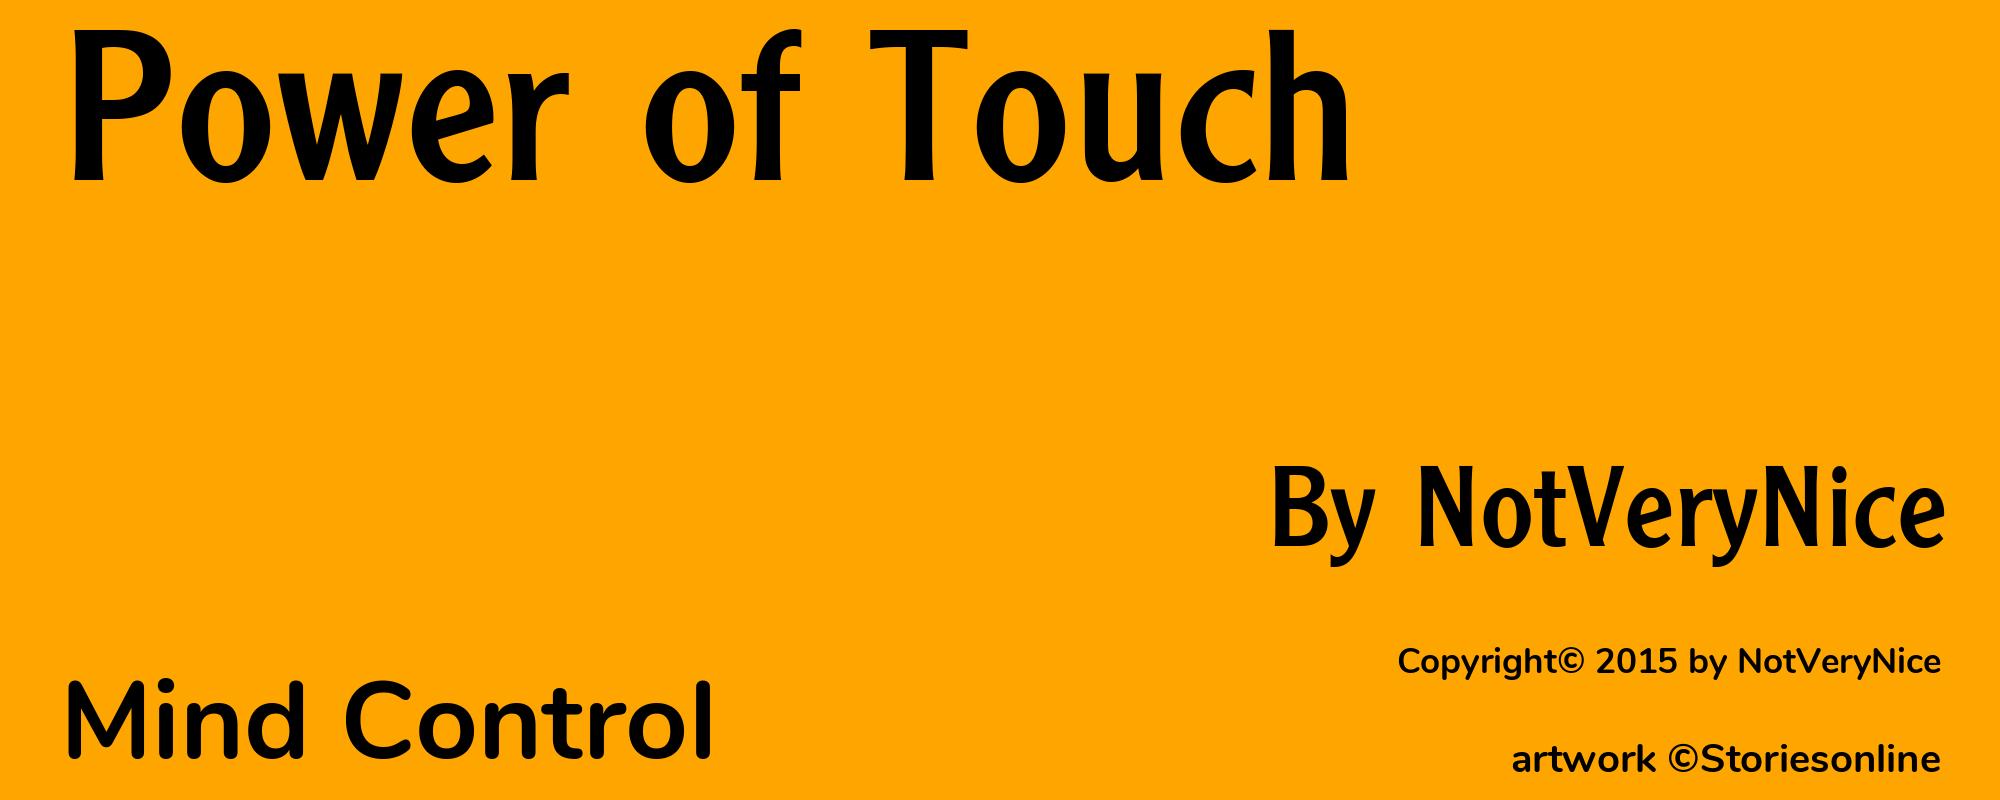 Power of Touch - Cover